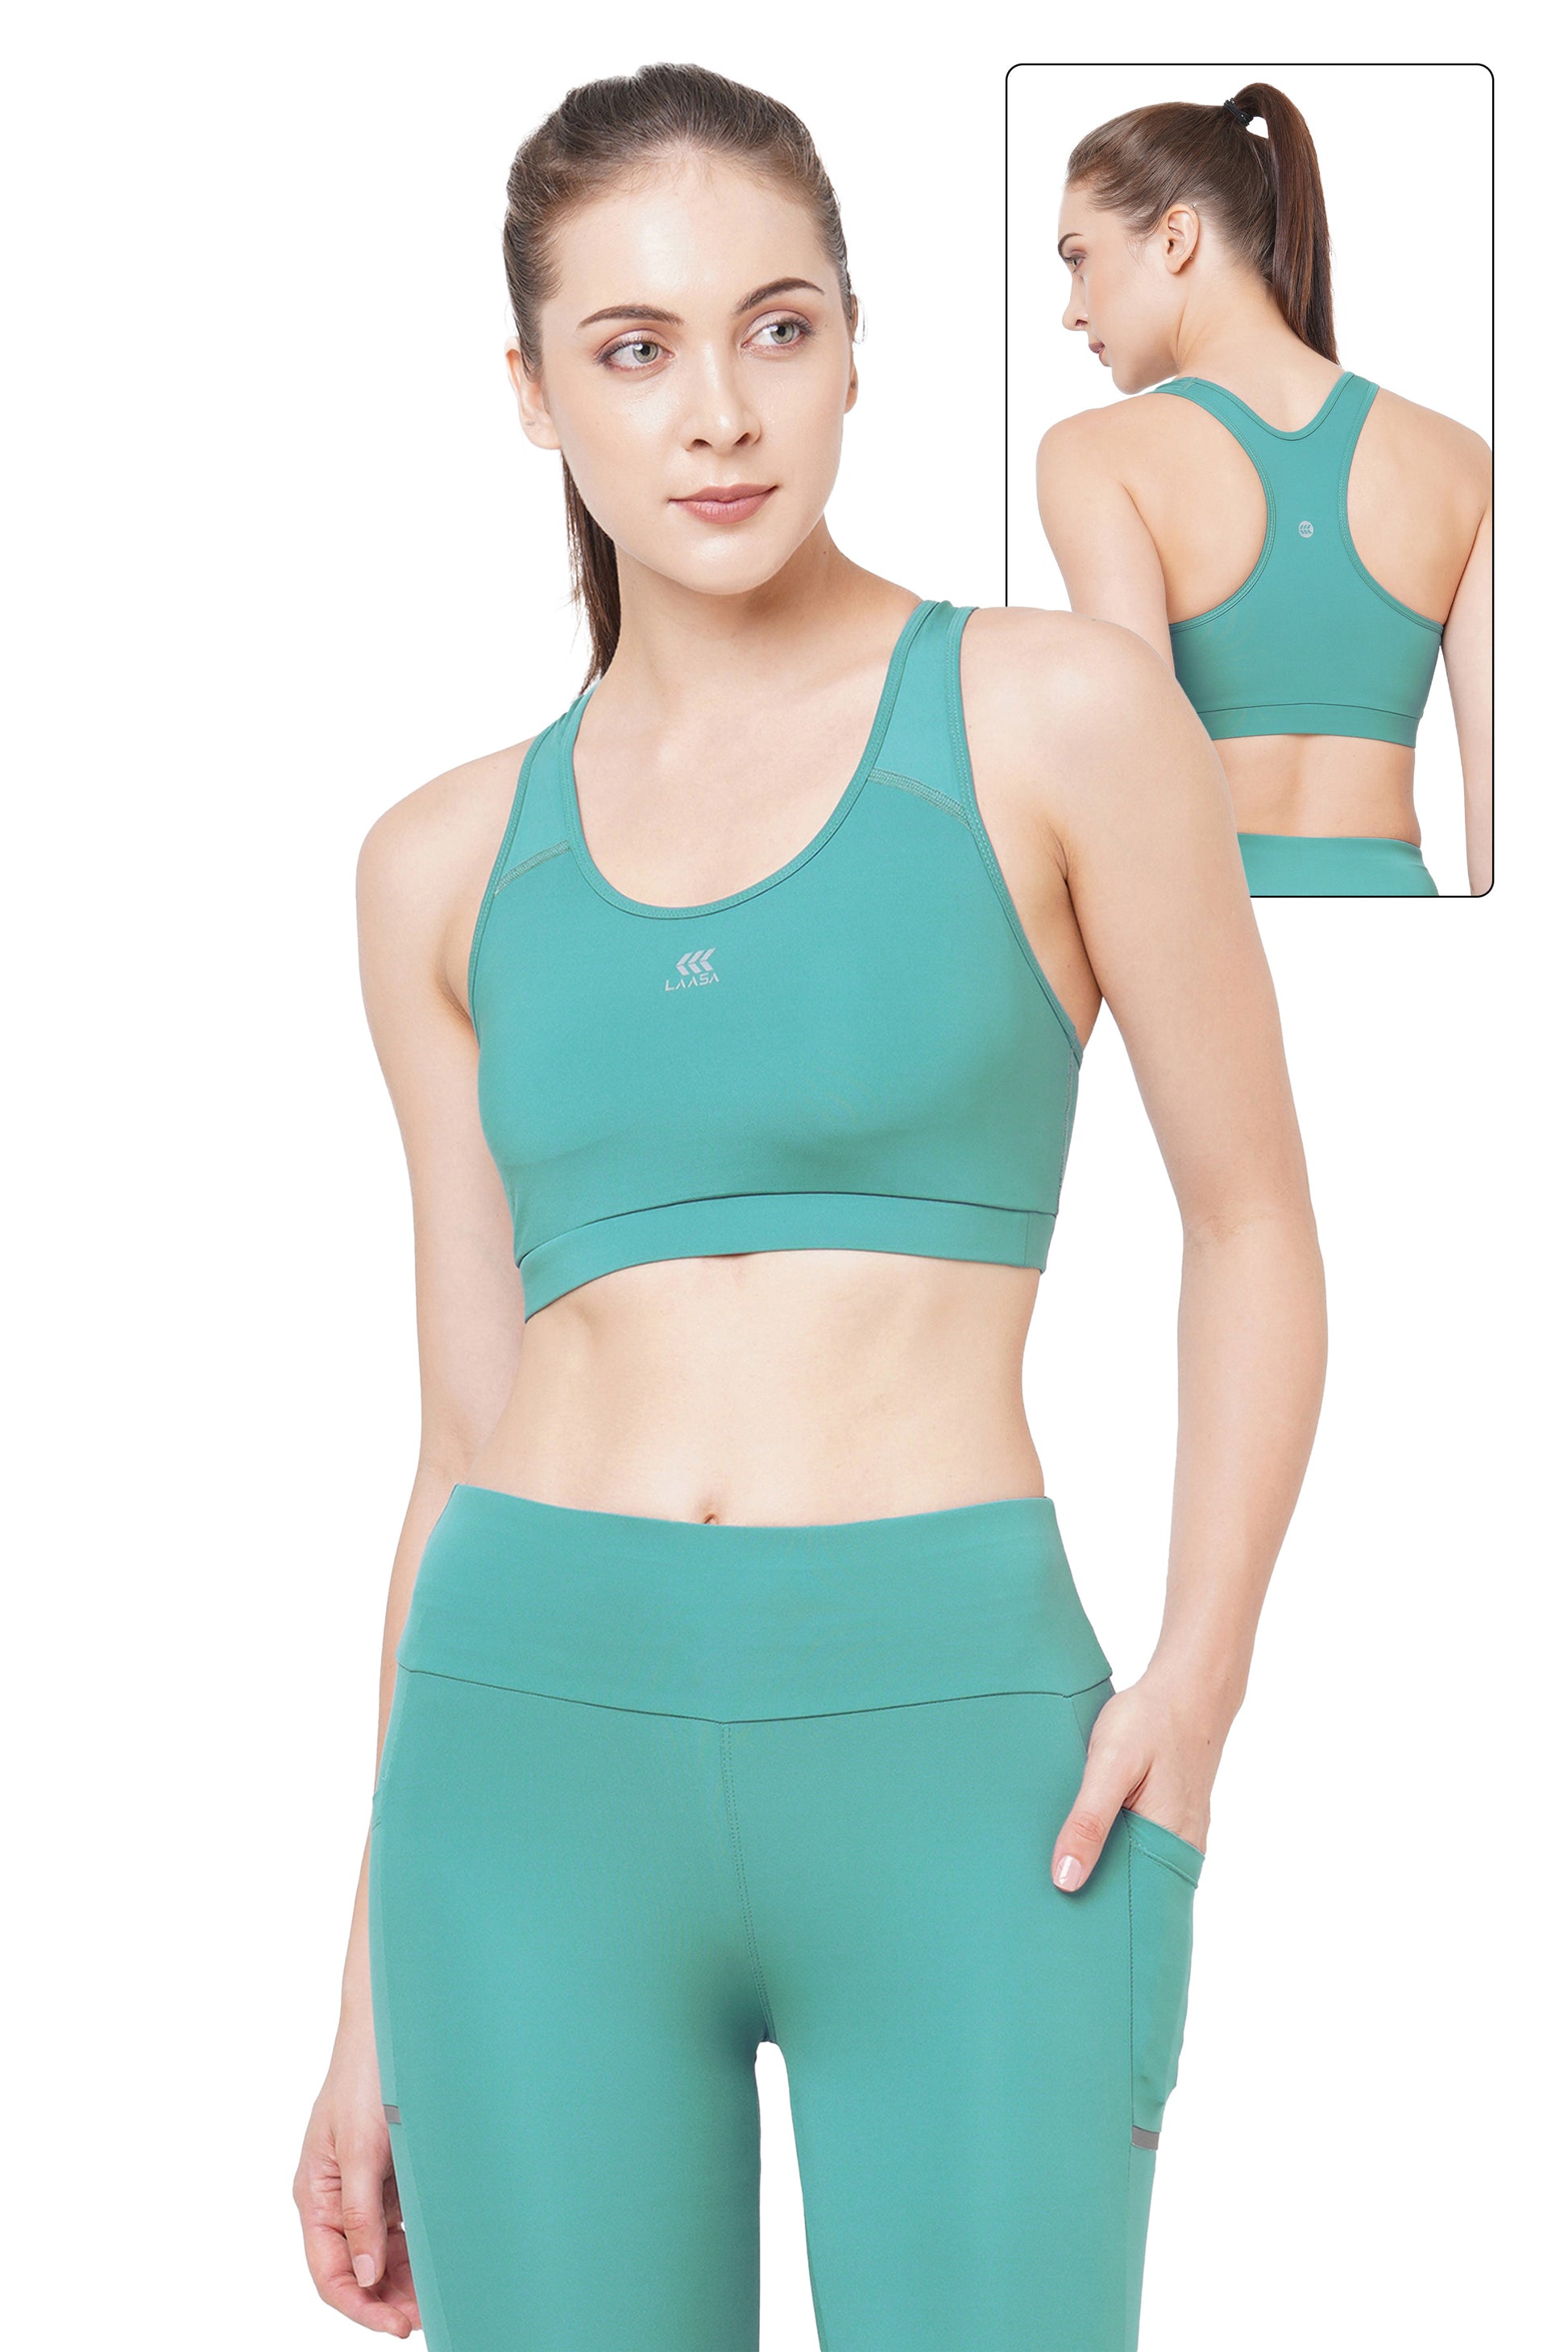 Laasa Sports  JUST-DRY High Impact Workout Sports Bra for Women